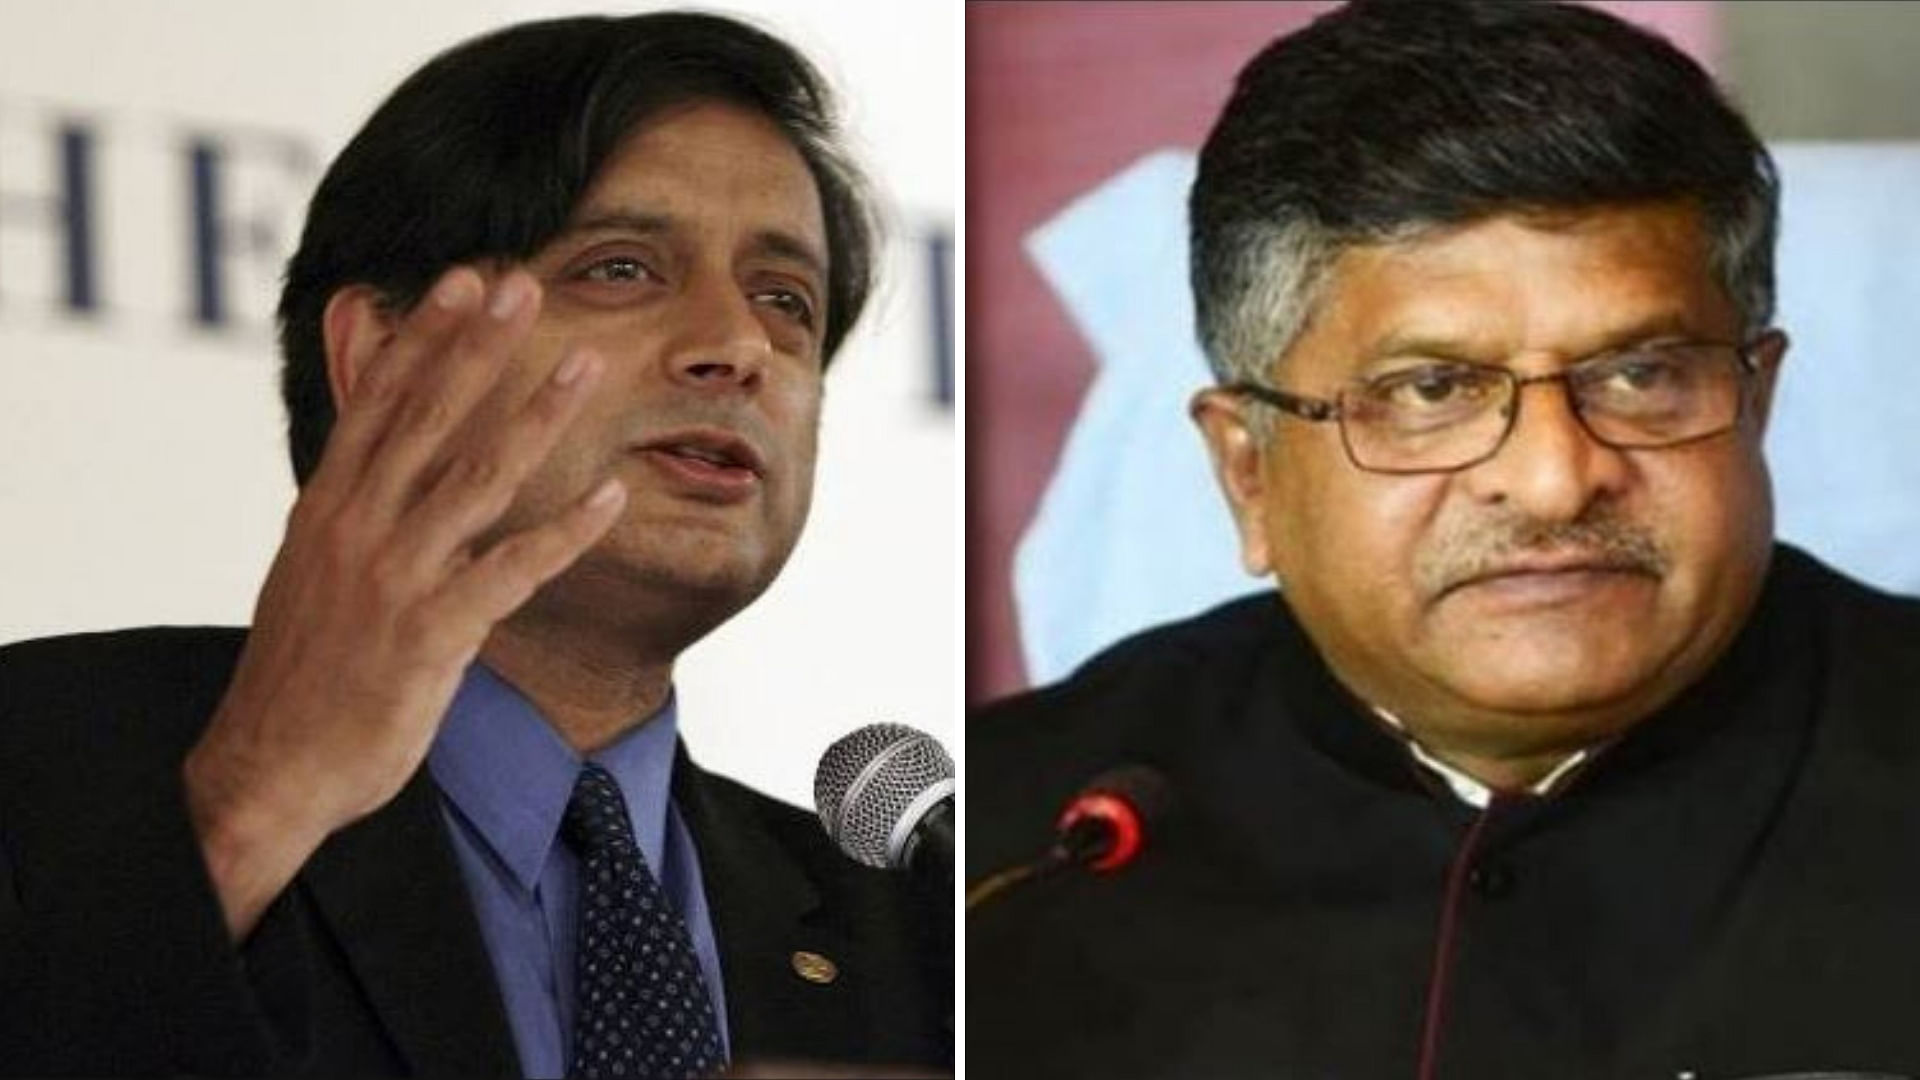 Shashi Tharoor raised objections after Union Minister Ravi Shankar Prasad allegedly called him an “accused in a murder case.”